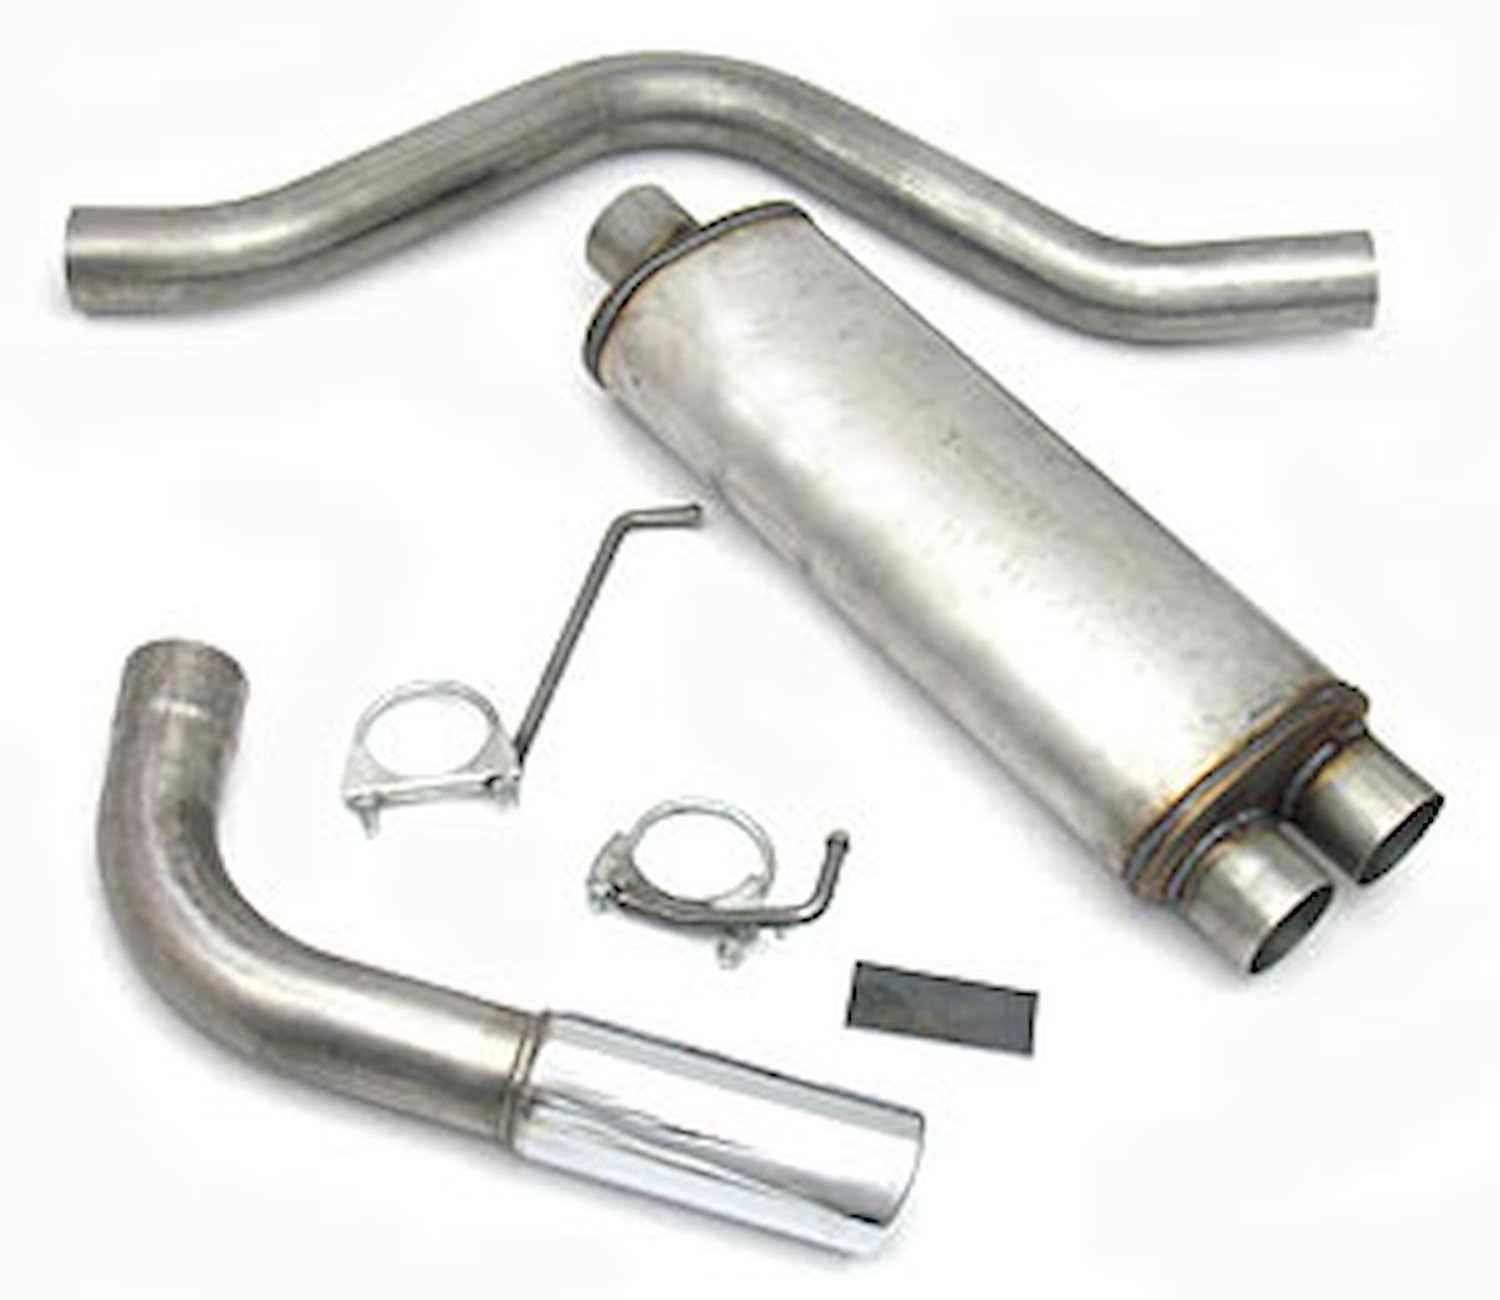 40-3016 Cat-Back Exhaust System for Select 2000-2006 Chevrolet Avalanche, Suburban & GMC Yukon